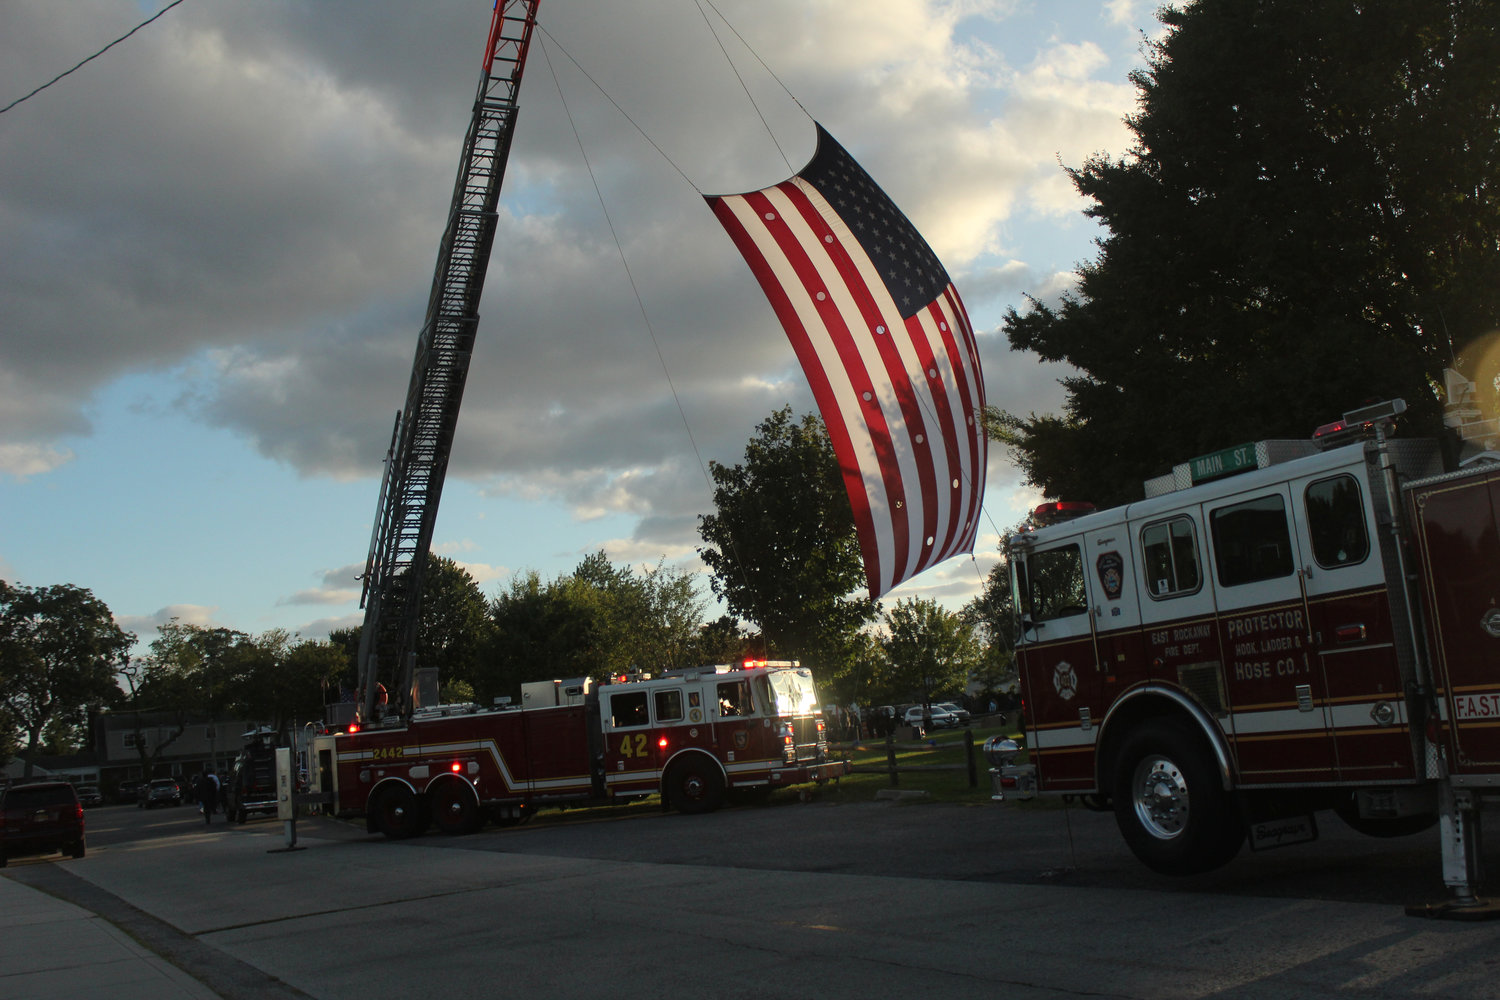 An American flag flew in memory of the late Luis Alvarez when the Oceanside community memorialized him last Friday.